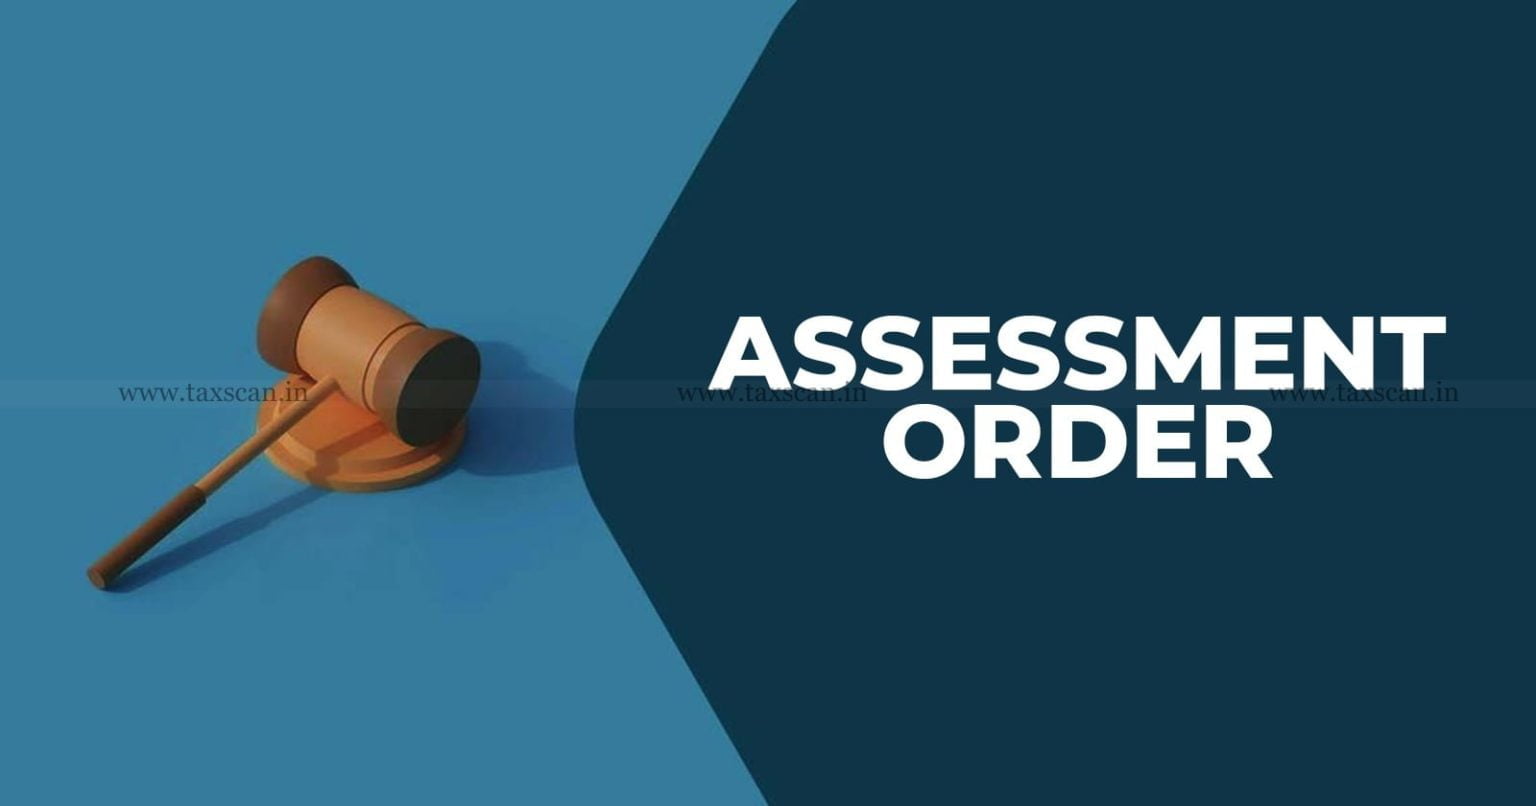 Kerala high court - Assessment Order - Income tax - Violation of natural justice - Kerala HC quashes assessment order - Income Tax Act assessment order - TAXSCAN